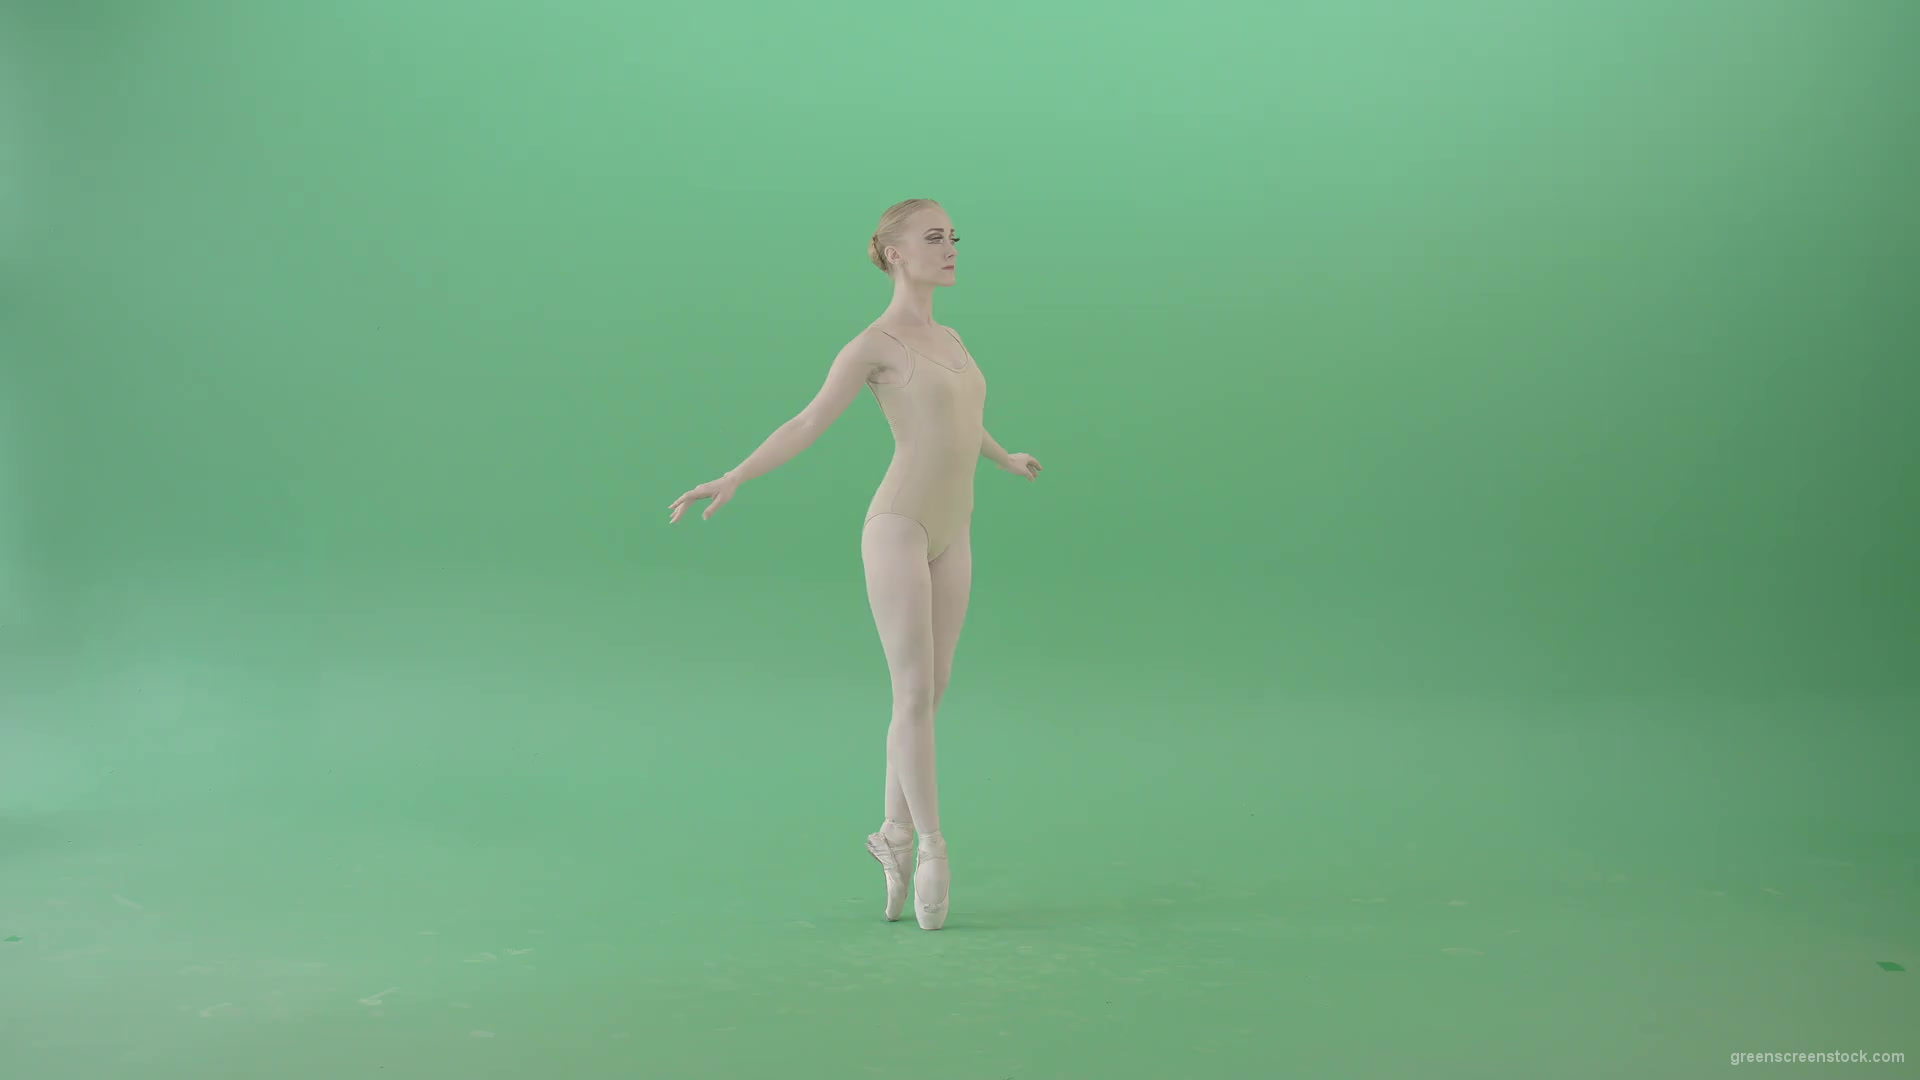 Classical-Ballet-Art-dancing-girl-in-body-skin-wear-chill-in-practice-isolated-on-green-screen-4K-Video-Footage-1920_001 Green Screen Stock